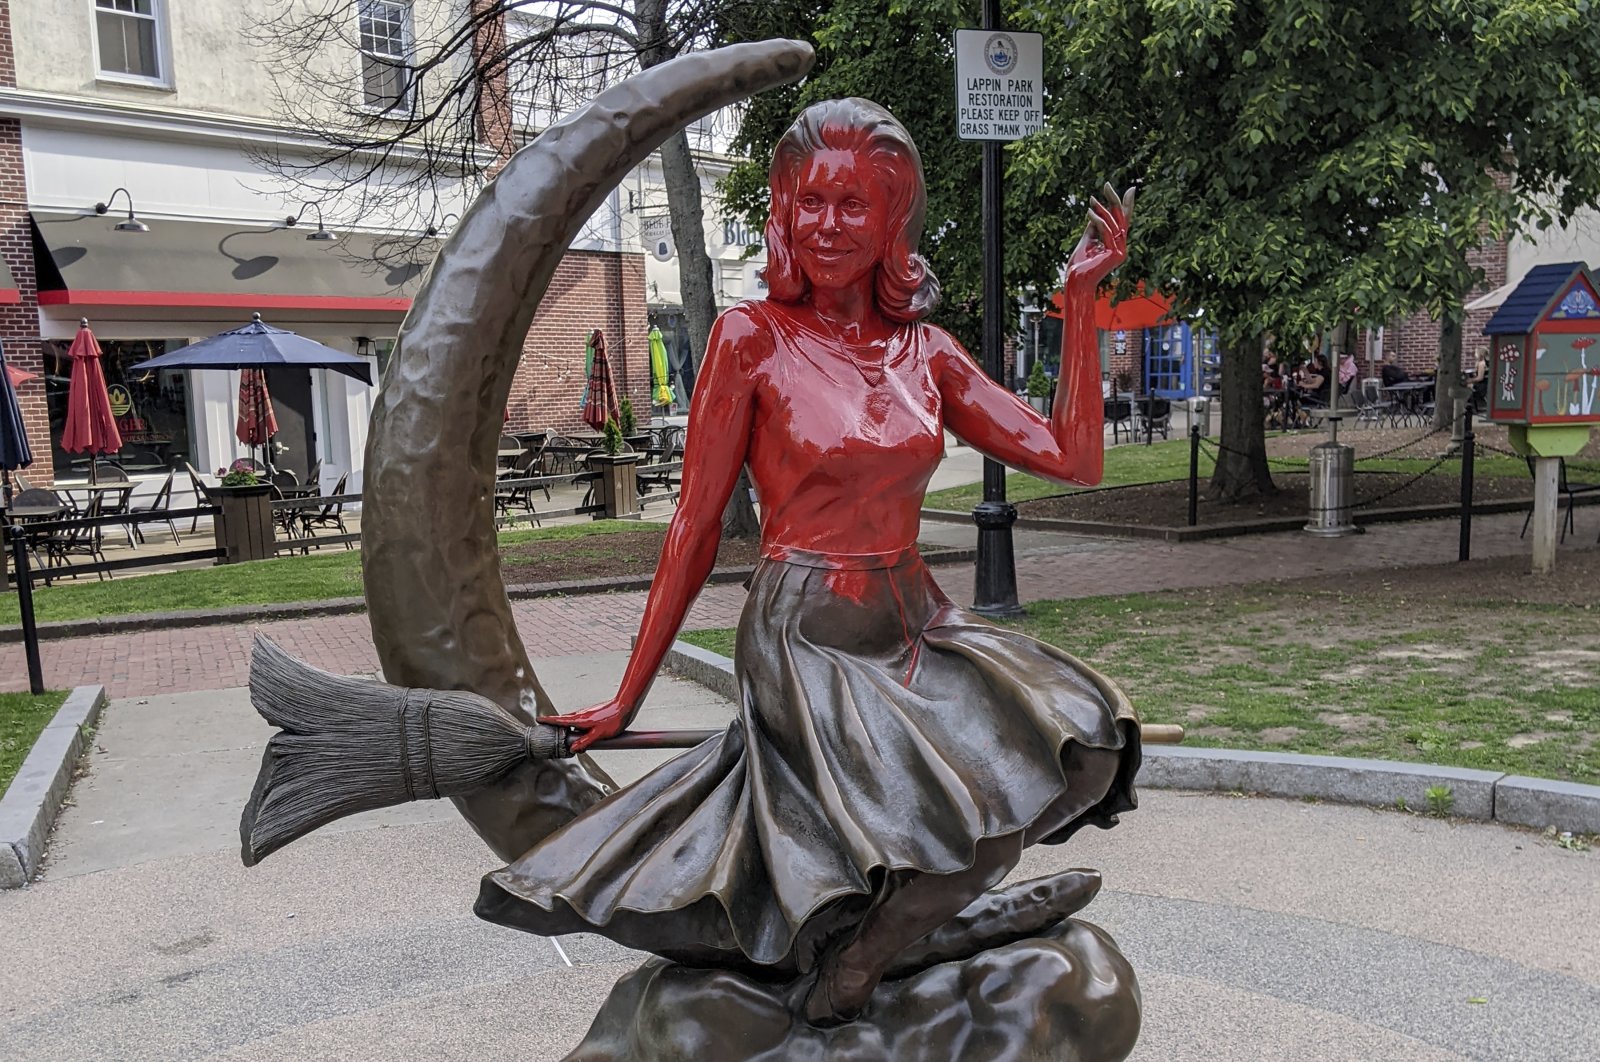 This image provided by Daniel Fury shows the "Bewitched" statue partially covered with red paint, in Salem, Massachusetts, U.S., June 6, 2022. (AP Photo)